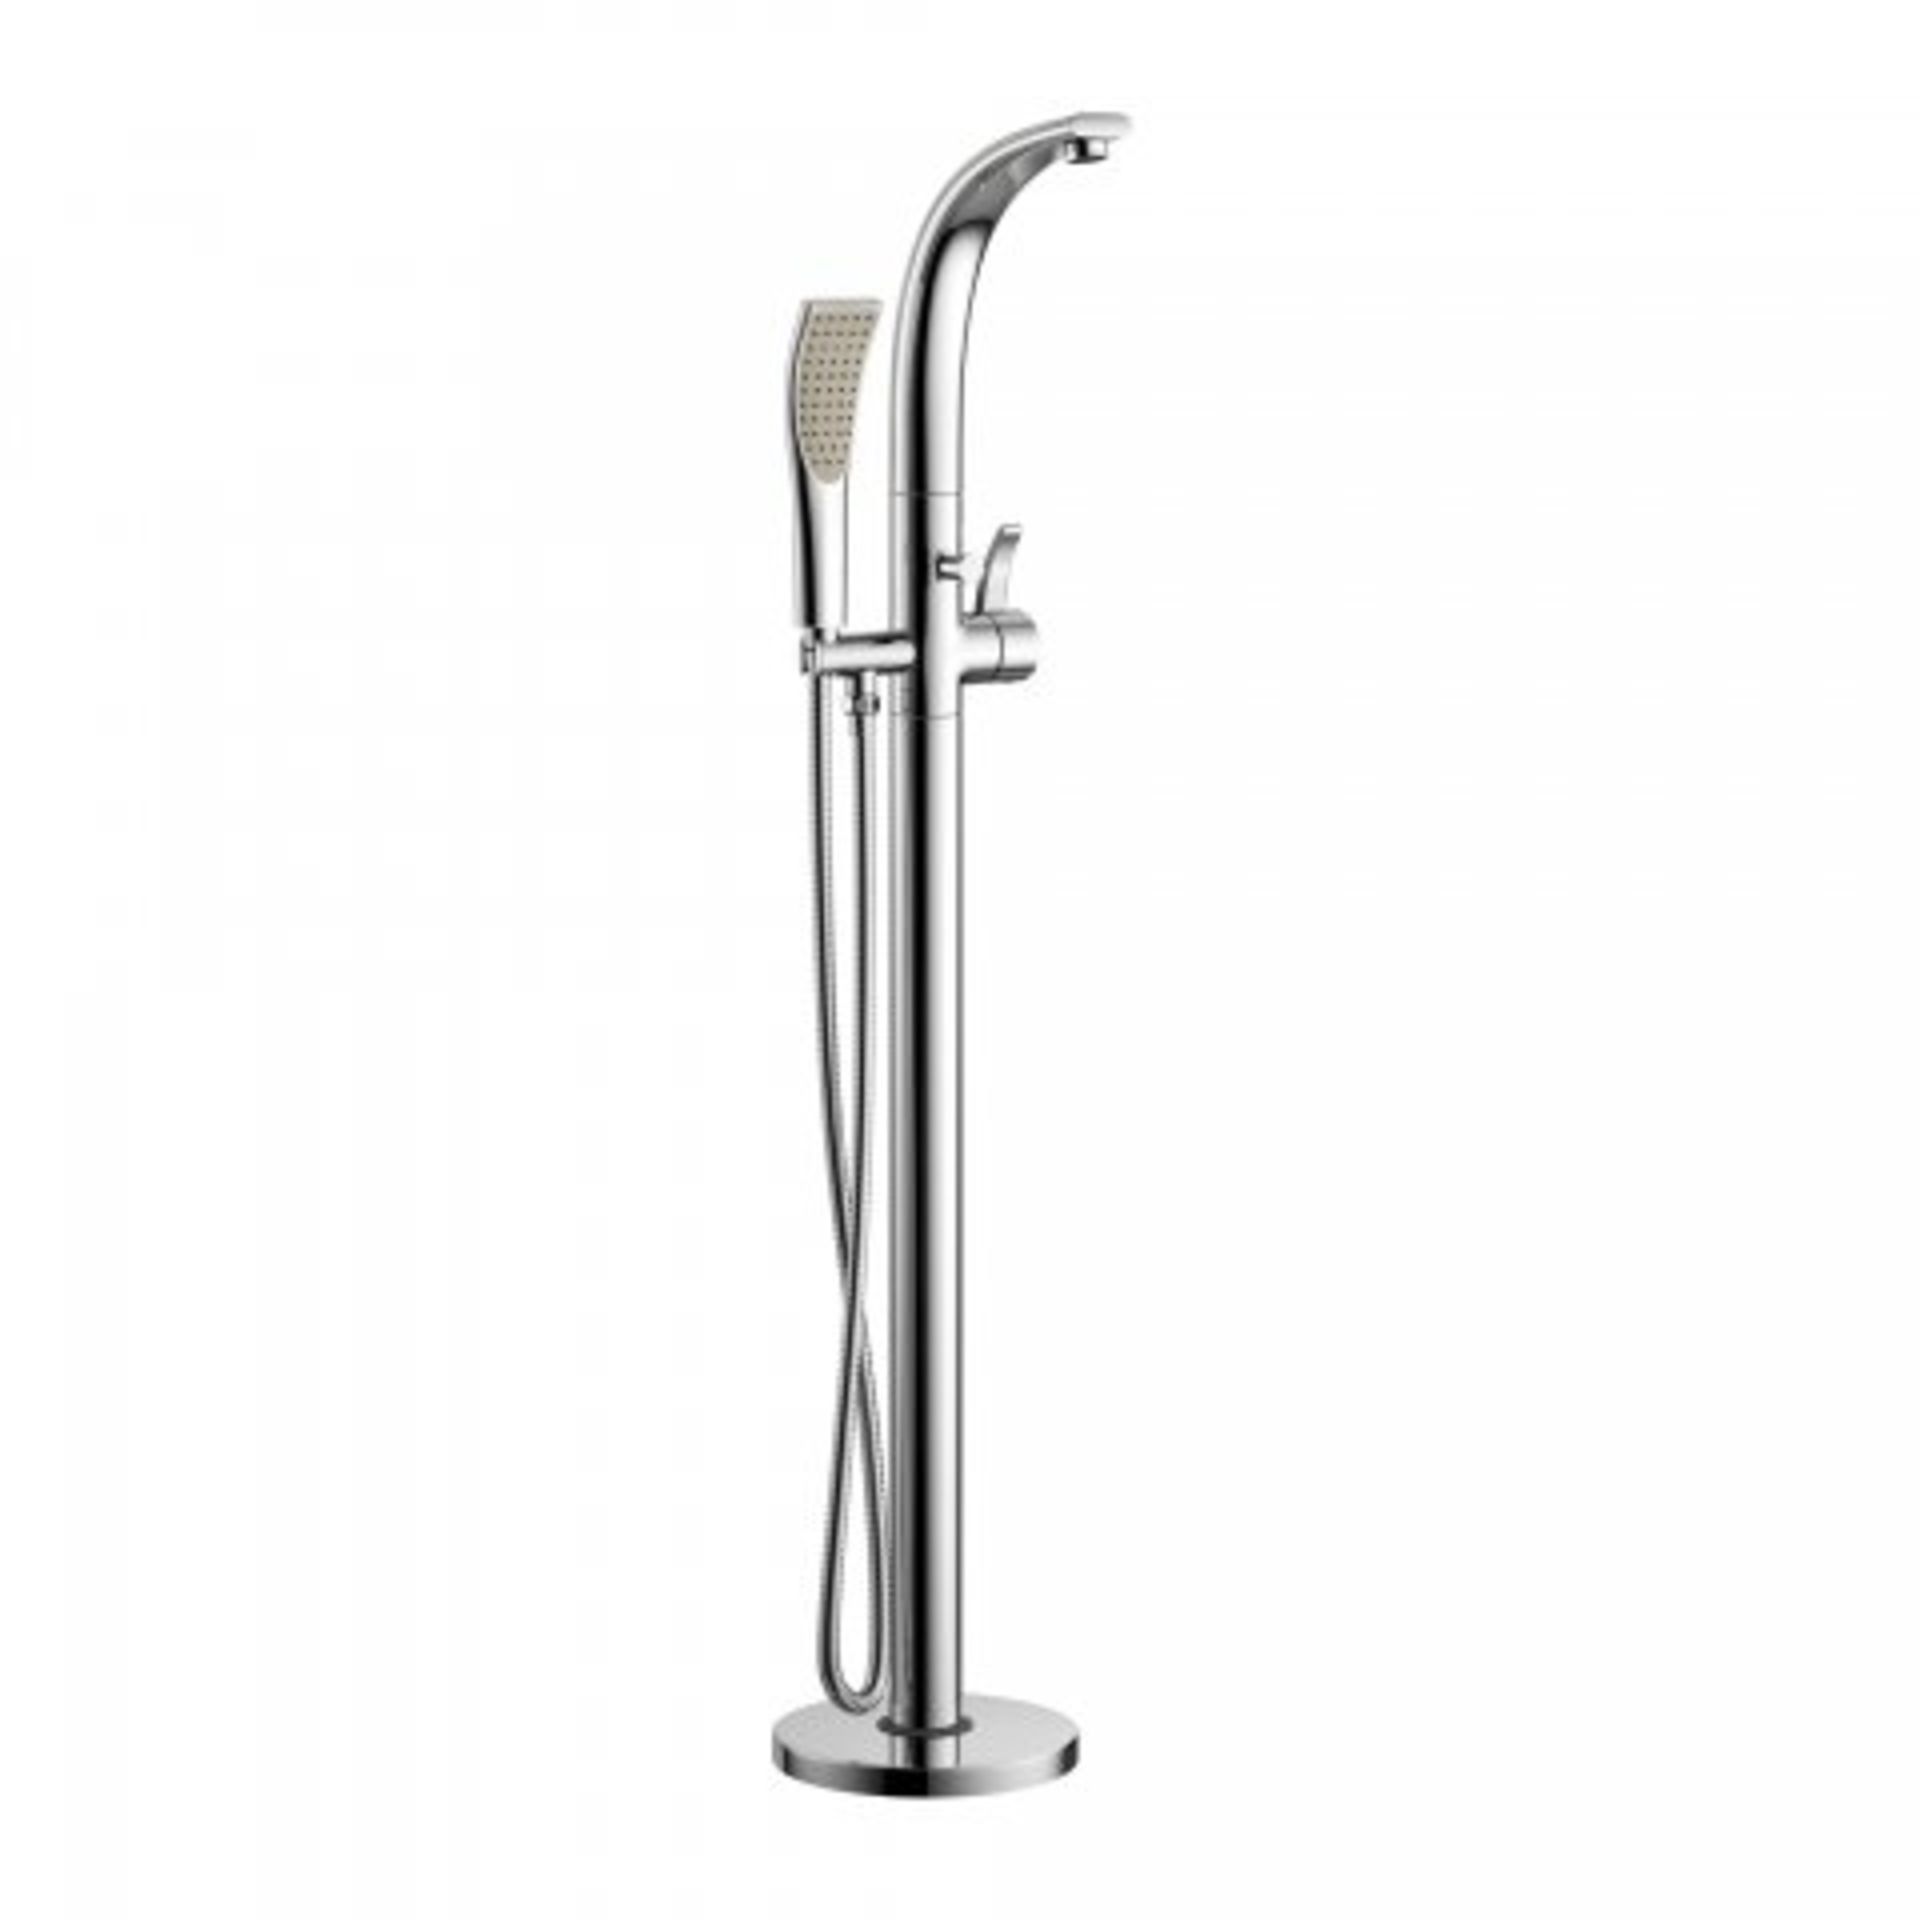 (M3) Vidago Freestanding Bath Mixer Tap with Hand Held Shower Head Add luxury and elegance to your - Image 2 of 2